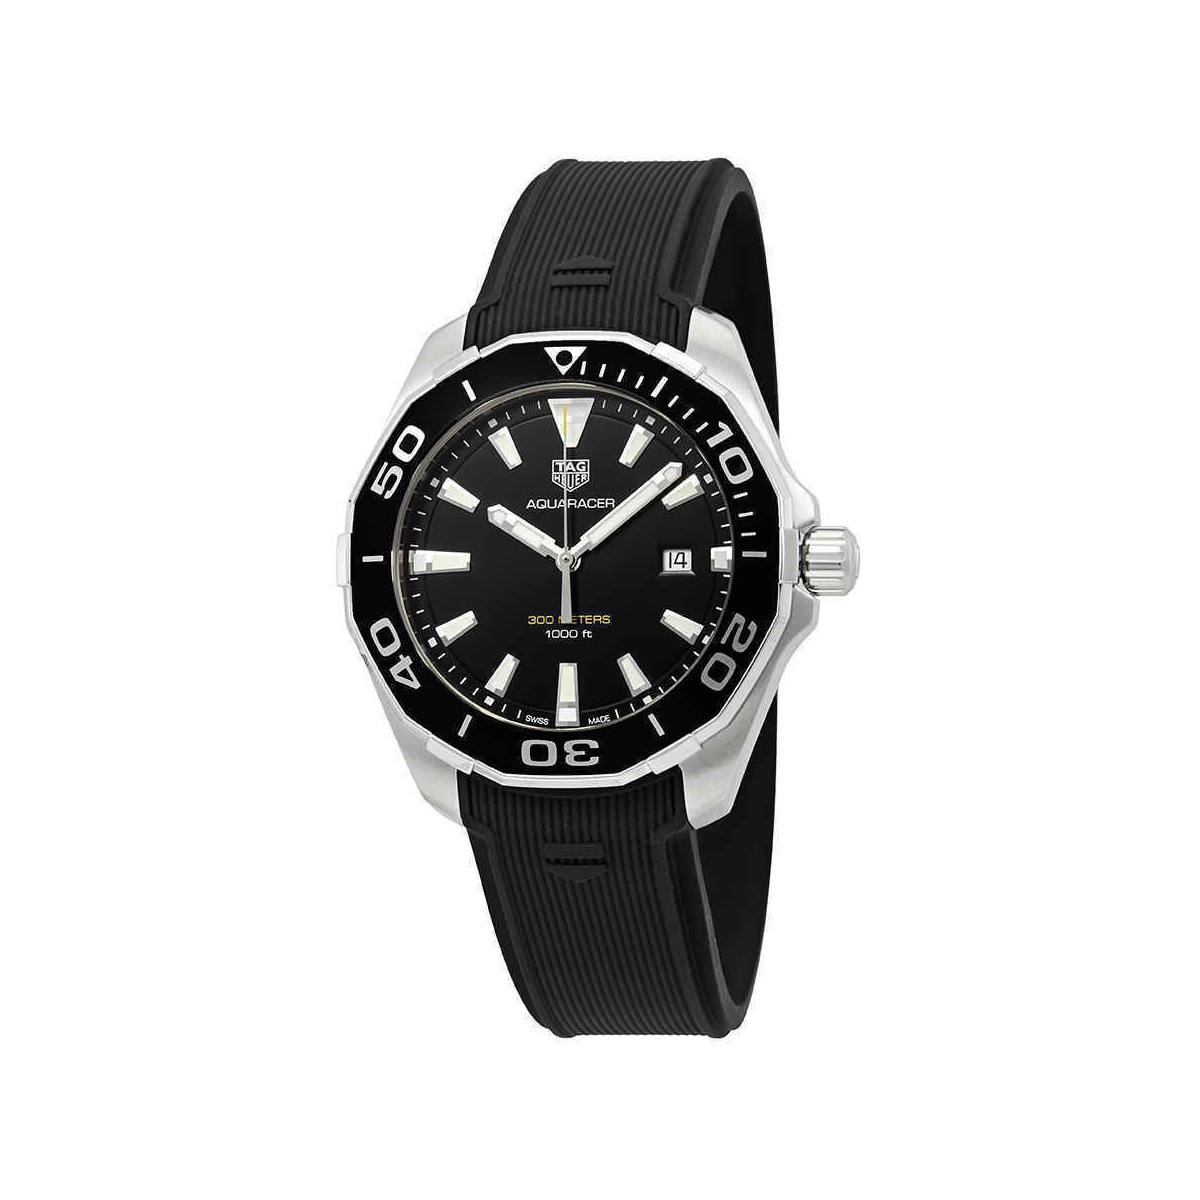 TAG Heuer WAY101A.FT6141